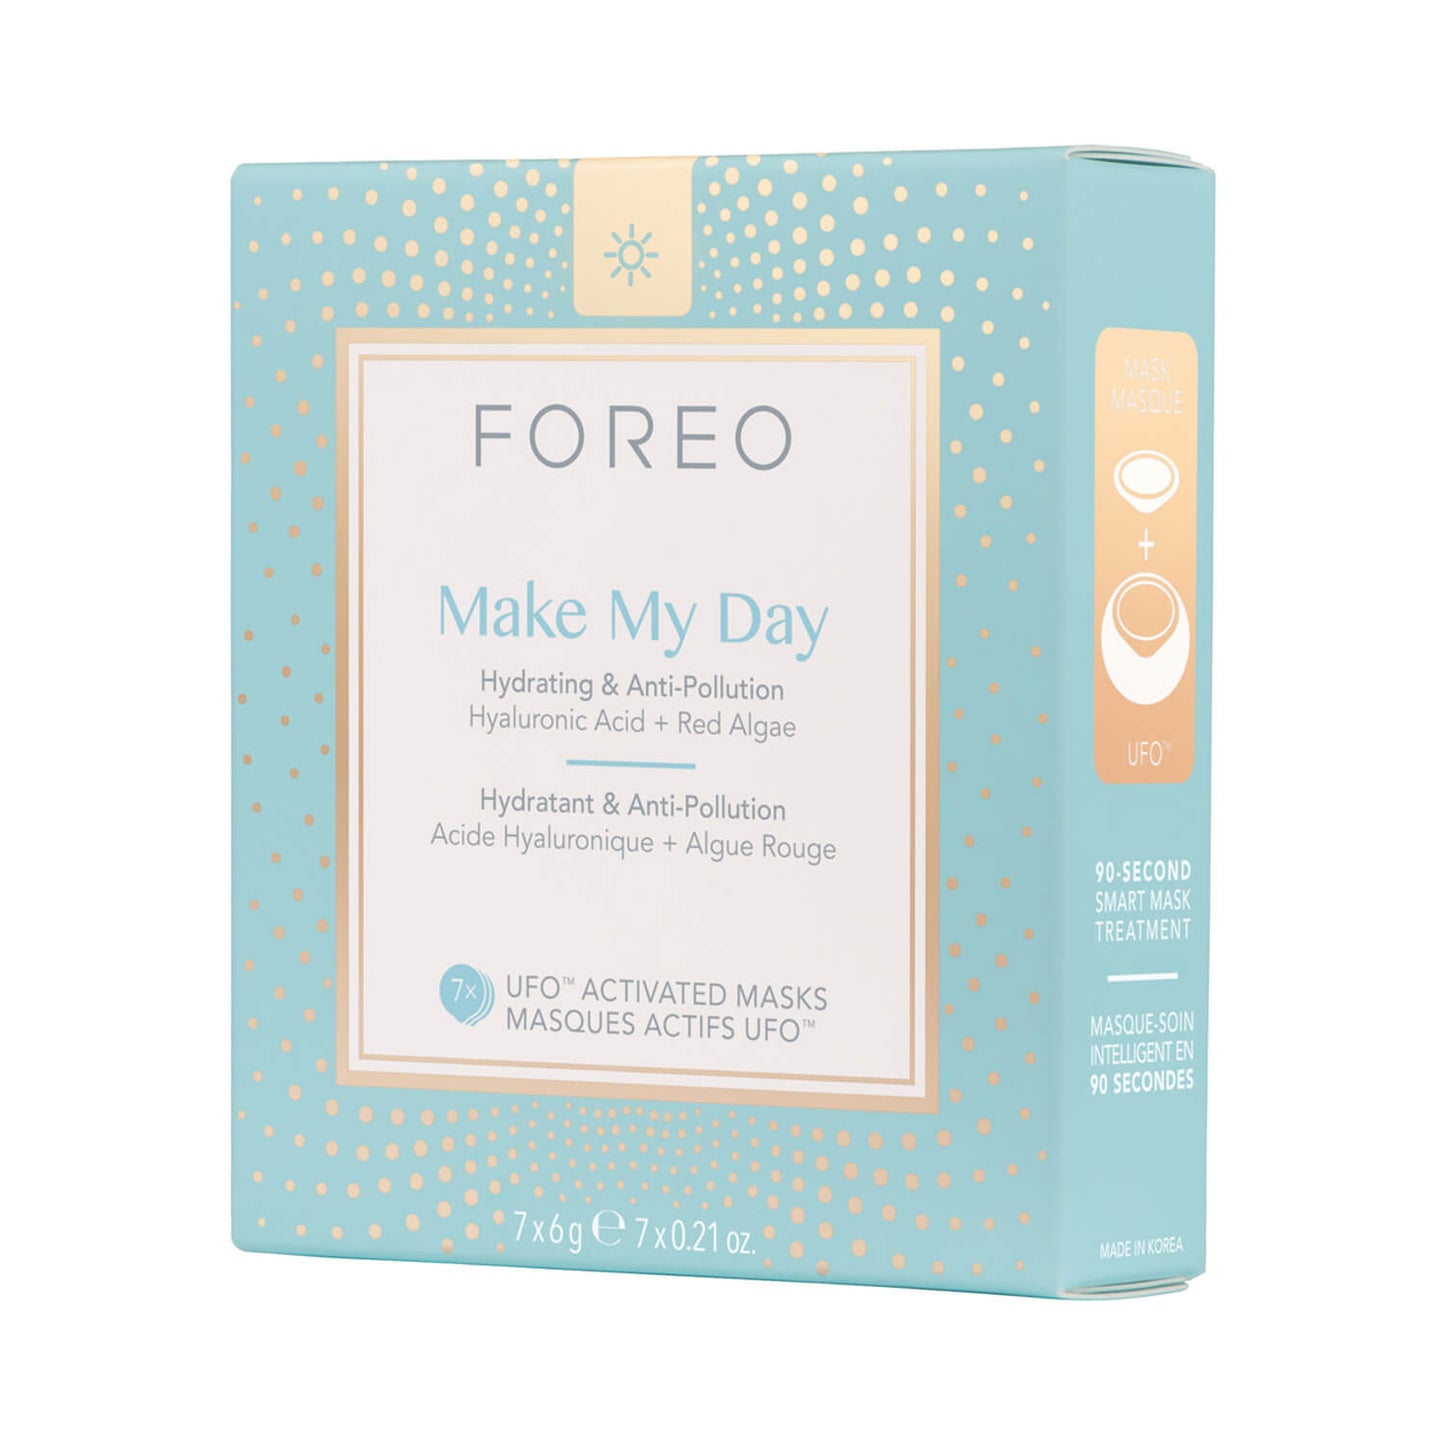 FOREO Make My Day UFO-Activated Mask 7 Pack The Package